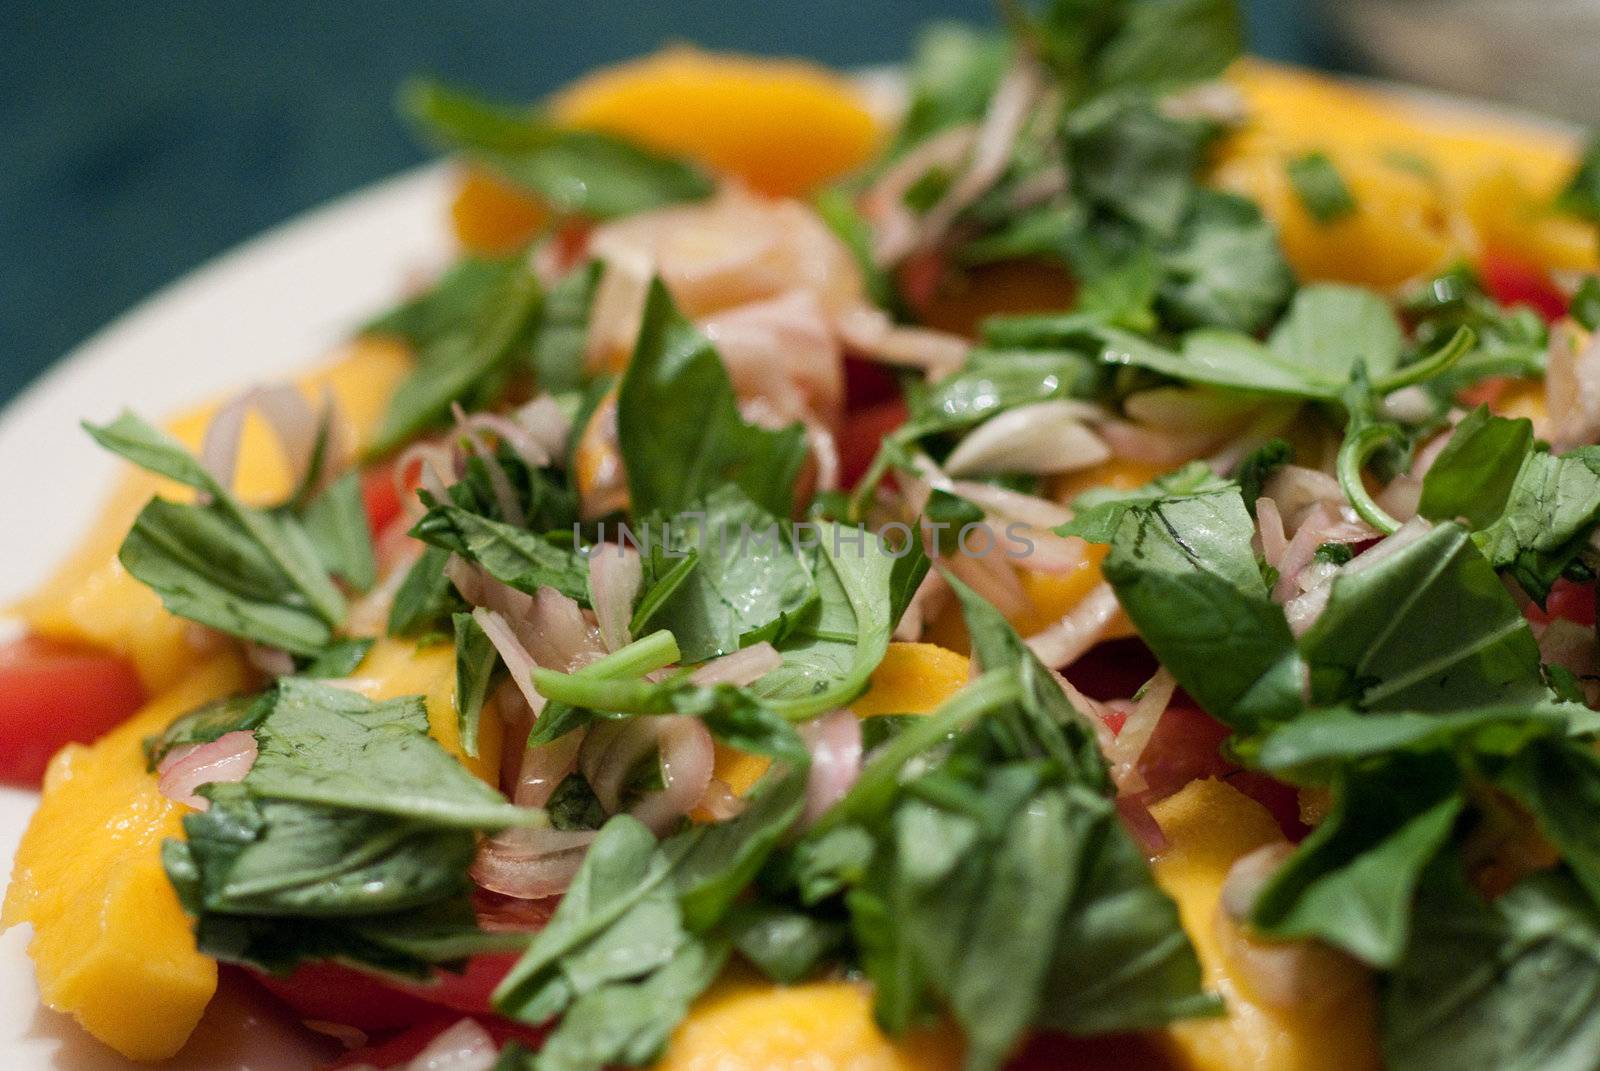 Green salad with mango and tomatoes by edan